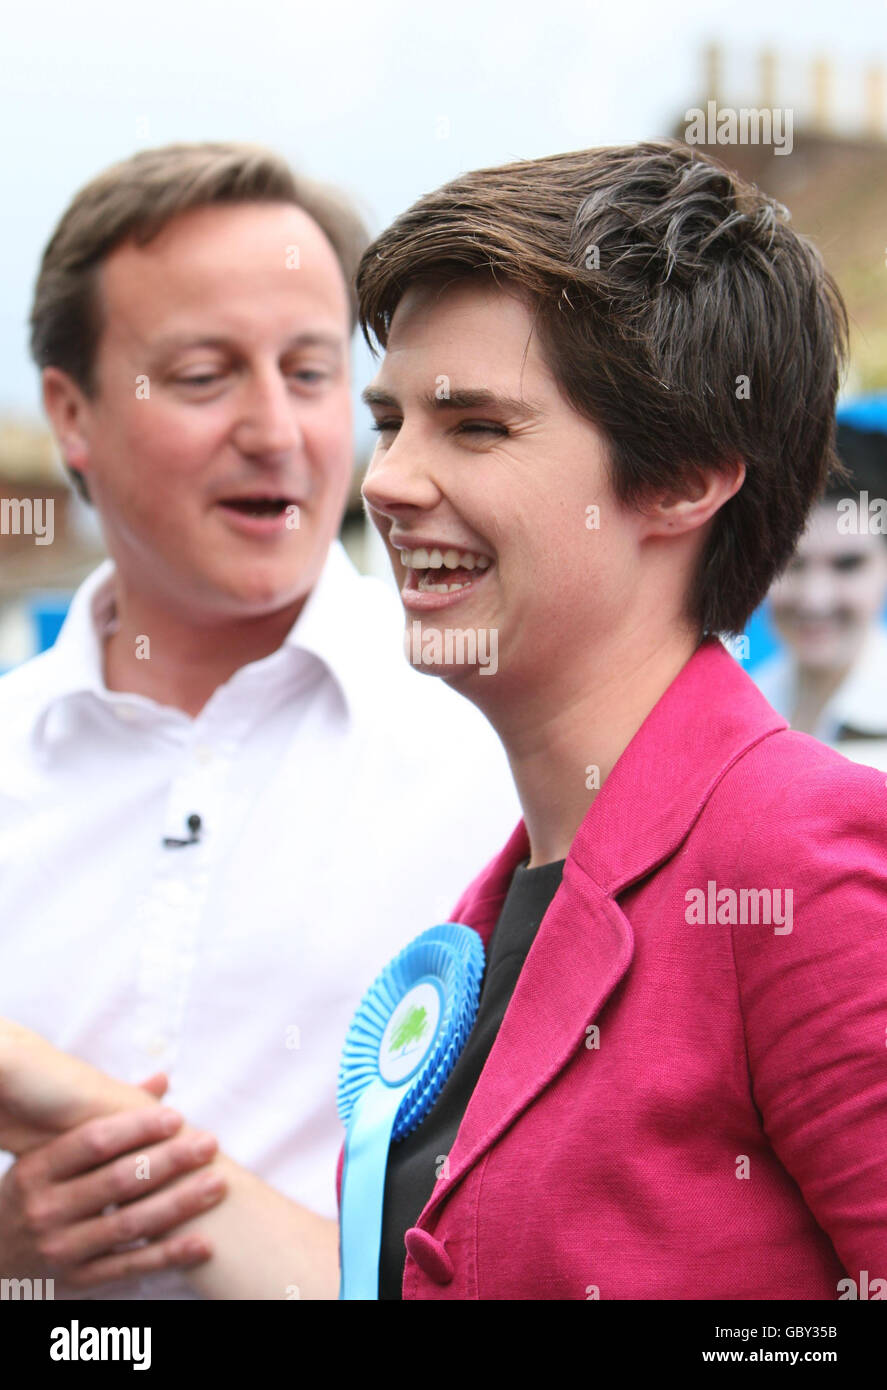 Conservative Party Leader David Cameron and new Conservative MP Chloe Smith (right) after her win in the Norwich North By-Election, Norwich. The Tory leader hailed his party's win in Norwich North as 'historic' as he travelled to Norwich to meet new Conservative MP and Tory supporters following the vote. Stock Photo